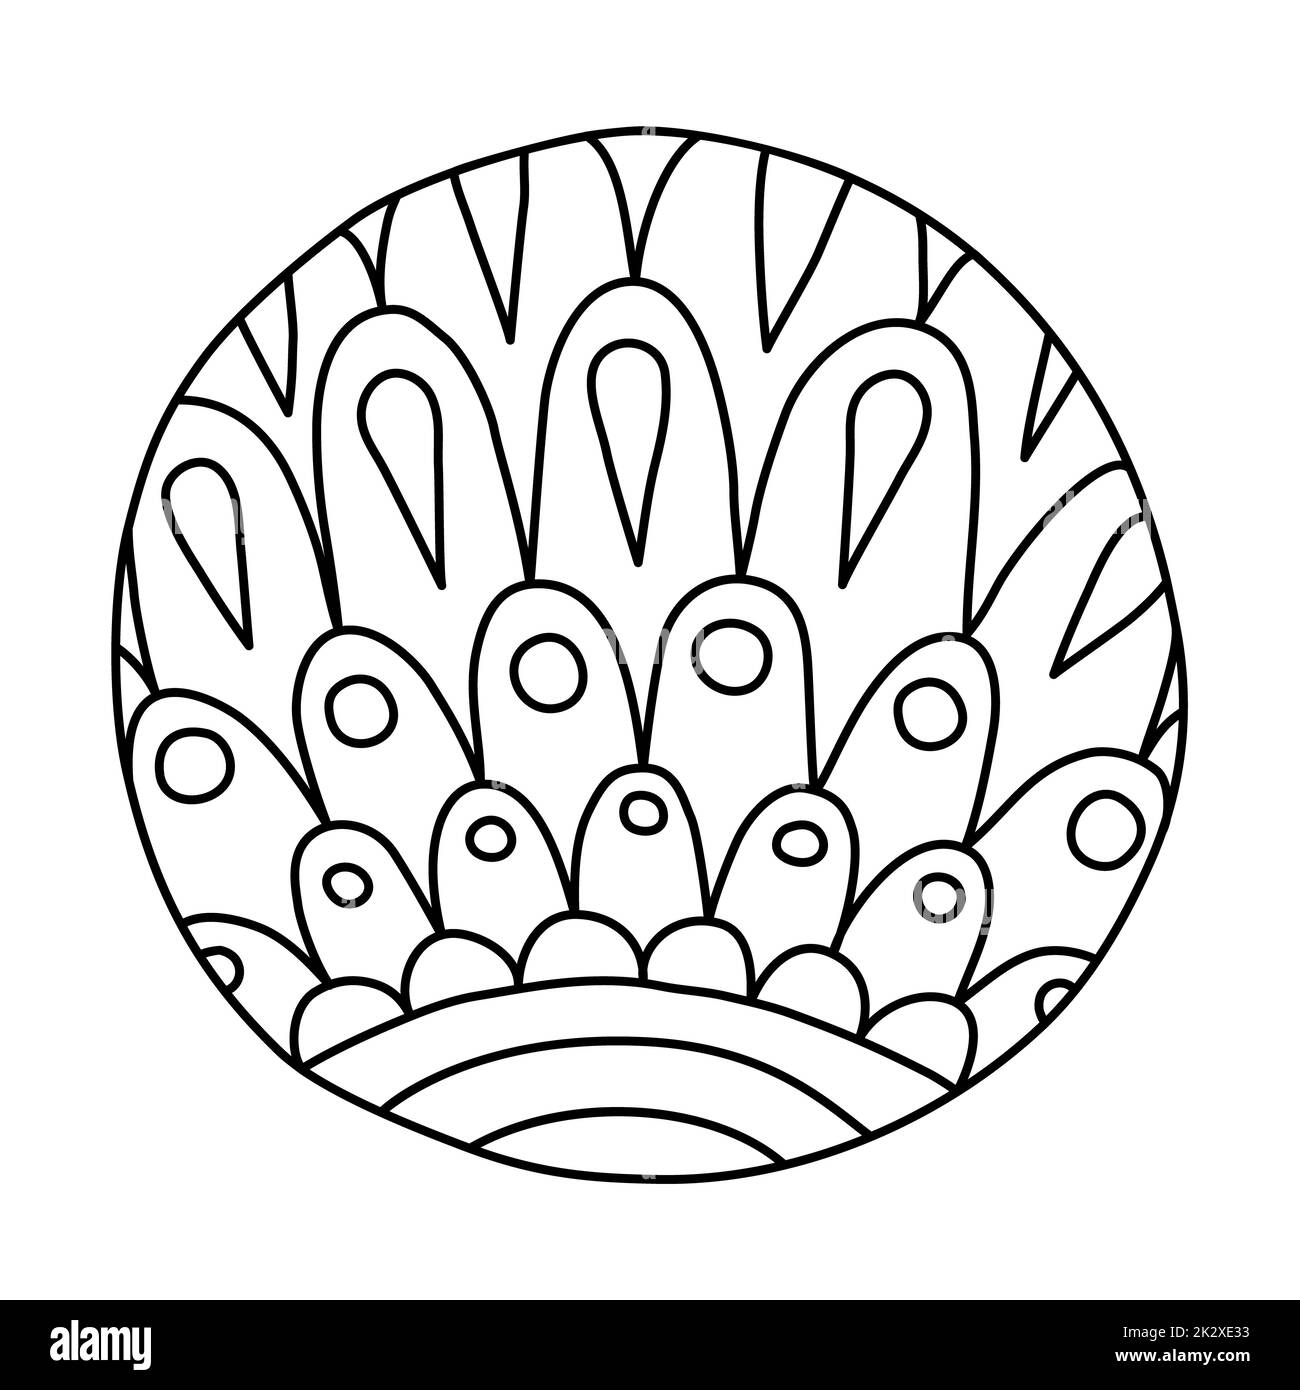 Circle filled with hand drawn doodles for coloring Stock Photo